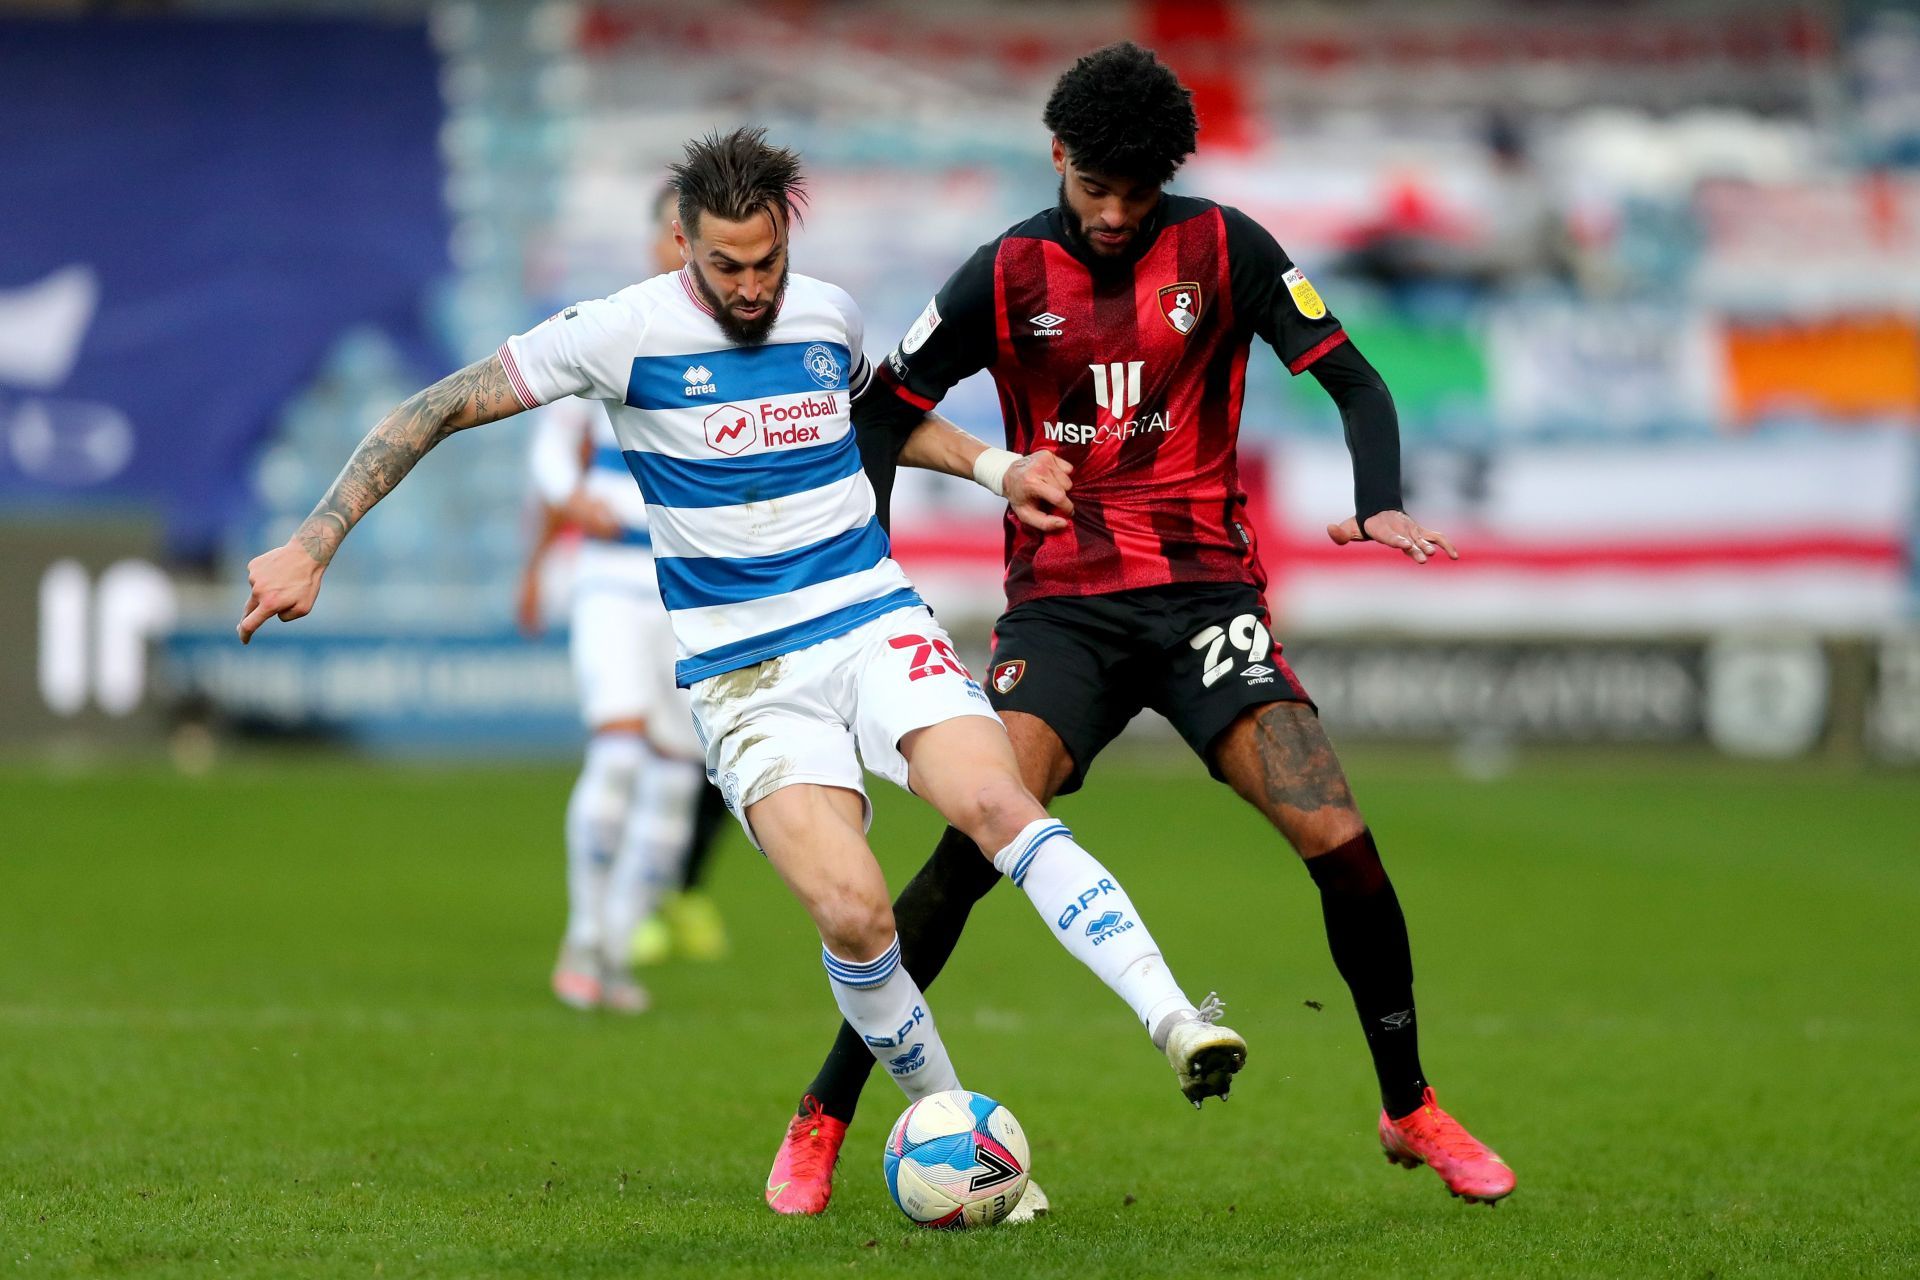 Queens Park Rangers play host to Bournemouth on Monday